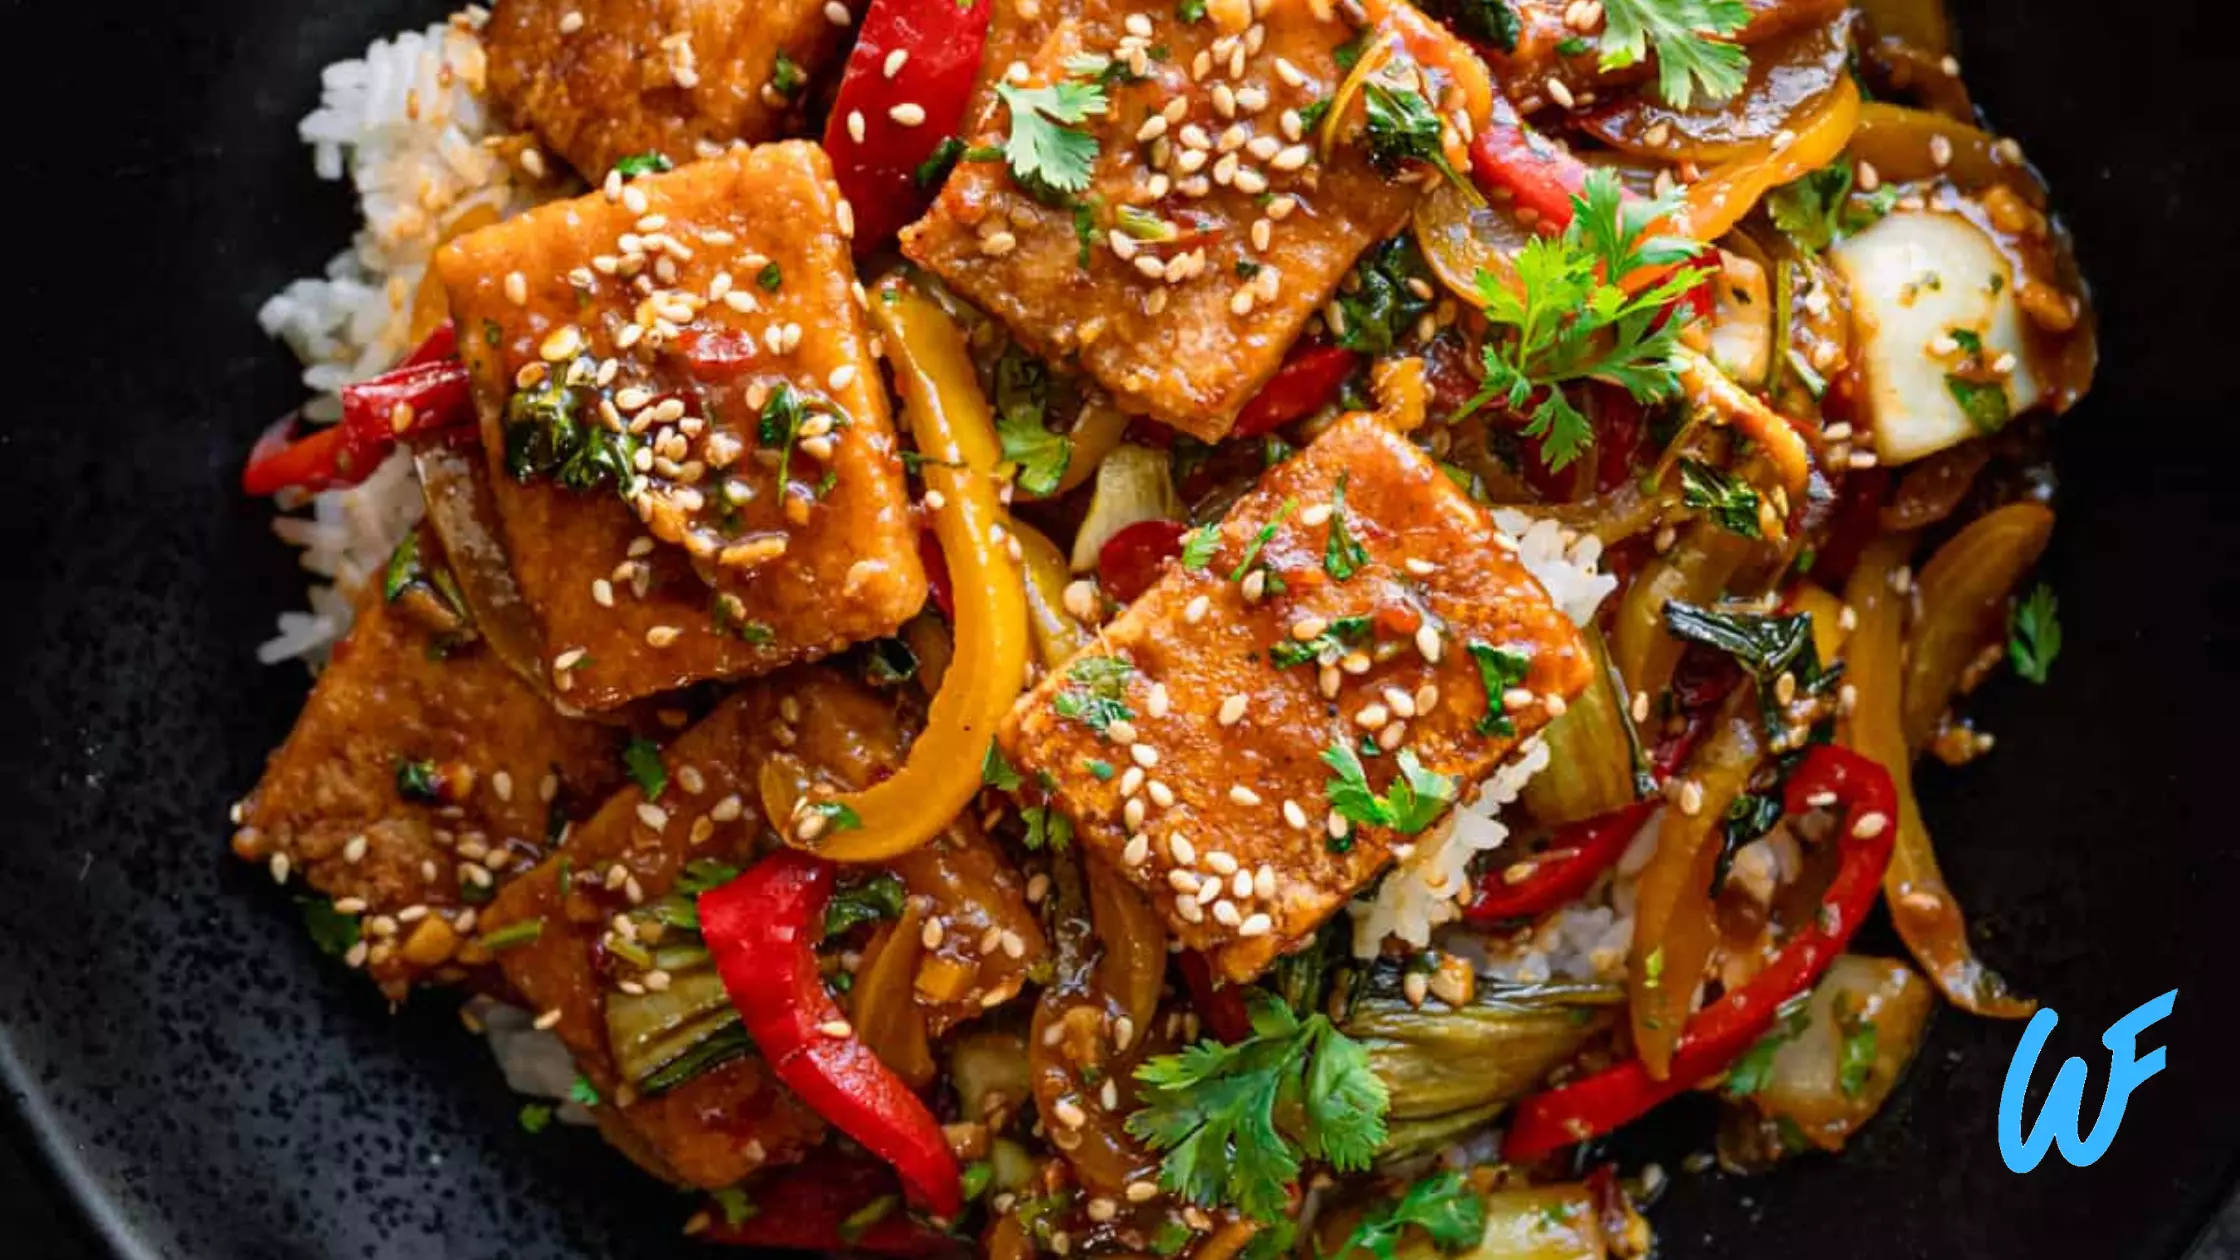 You are currently viewing Stir-Fried Tofu and Vegetables Recipe